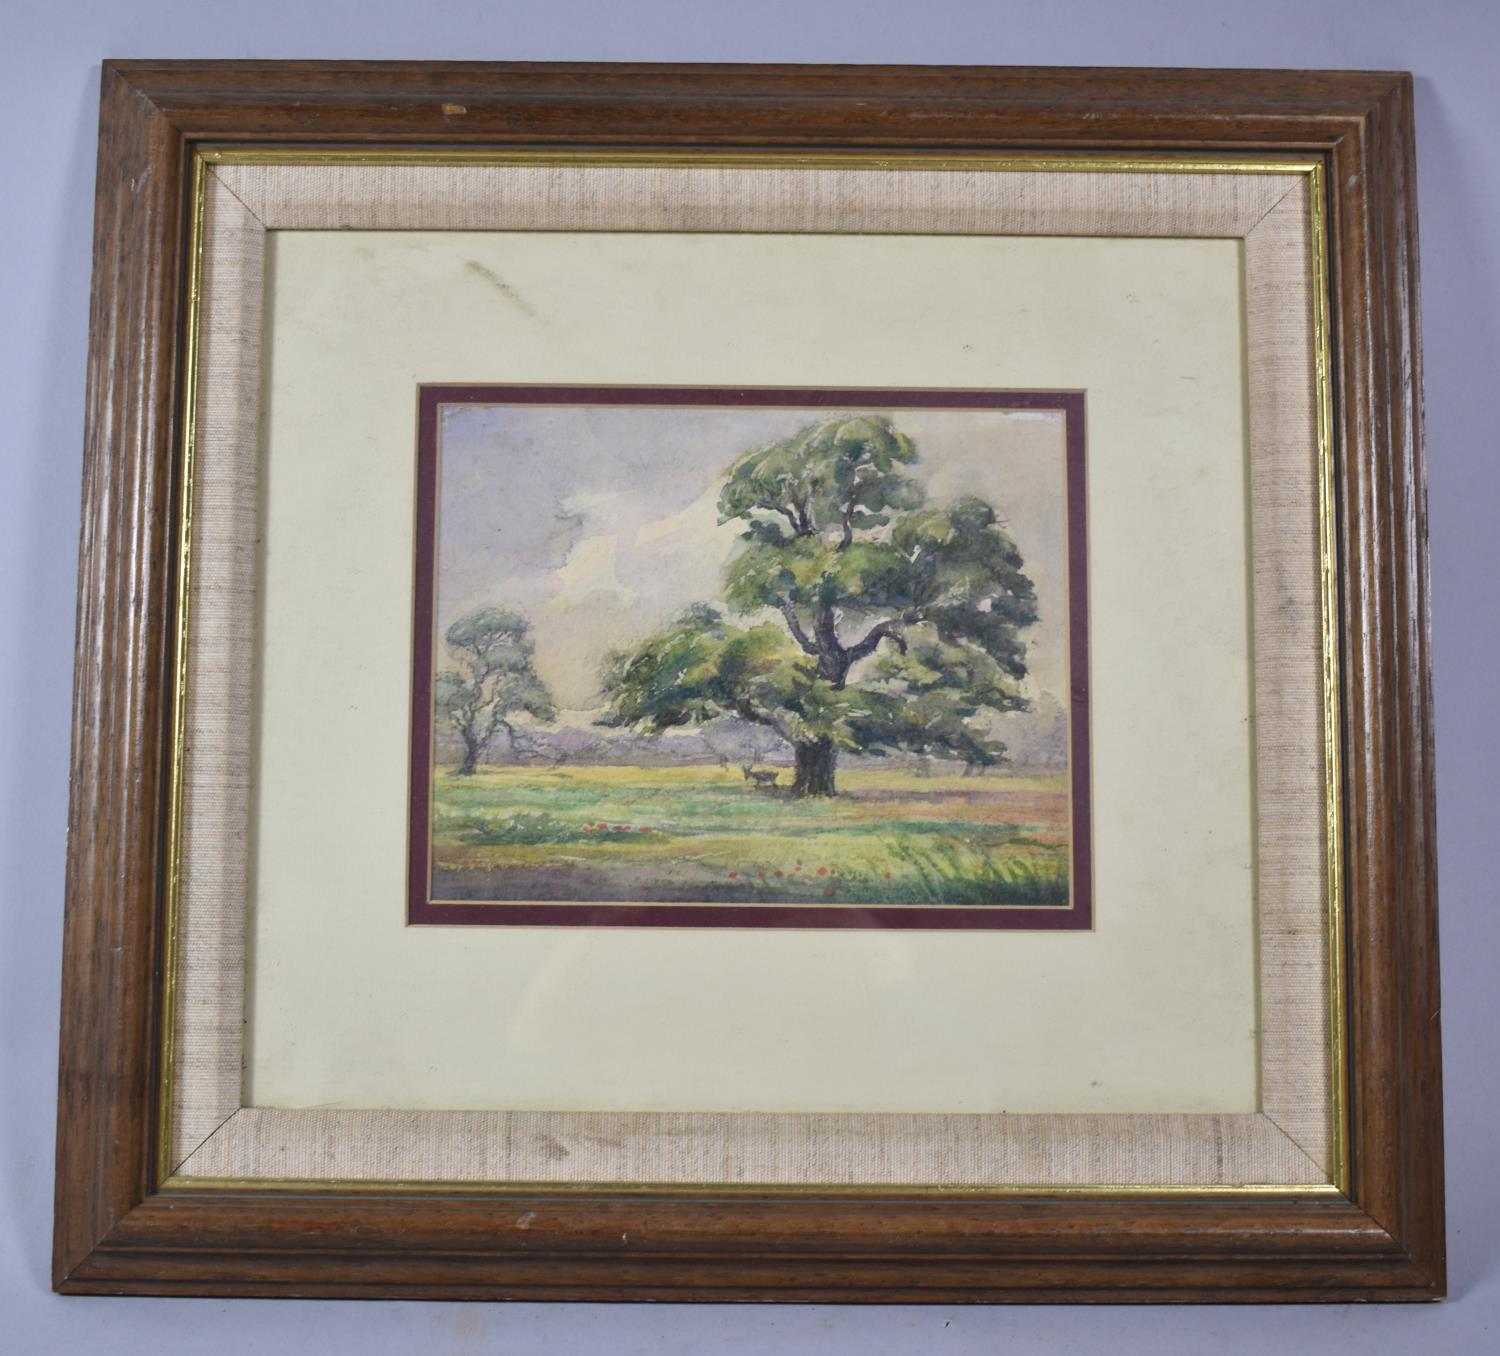 A Framed Watercolour Depicting Stag Under Tree, 18x14cm